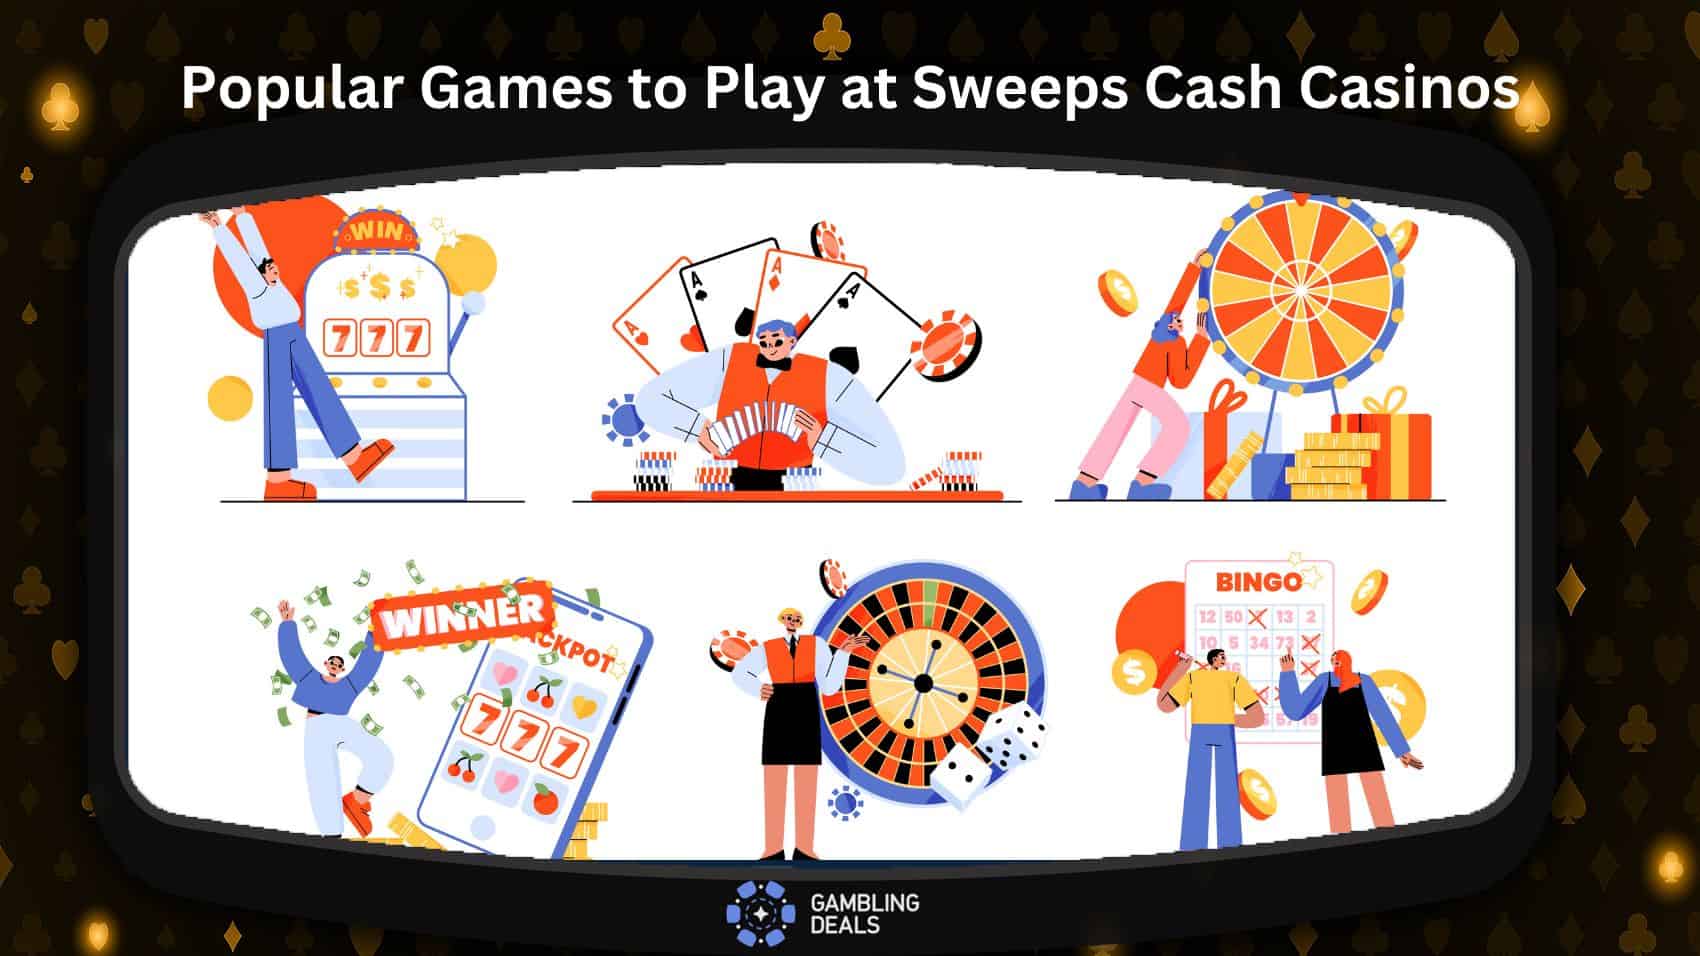 Popular Games to Play at Sweeps Cash Casinos